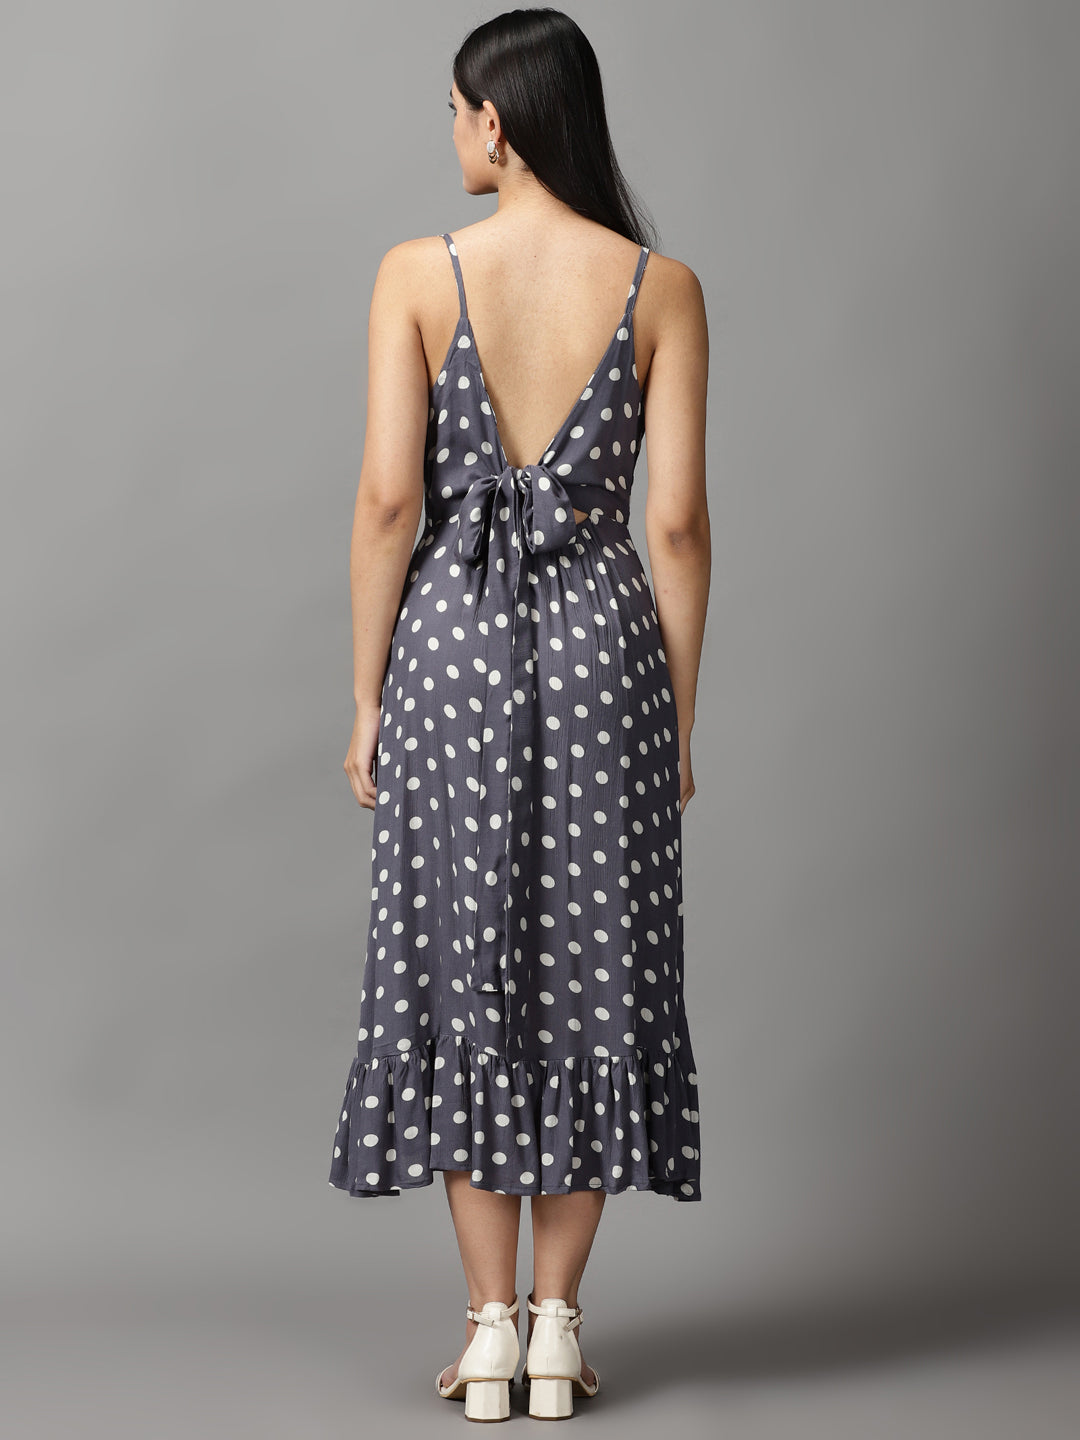 Women's Grey Polka Dots Fit and Flare Dress